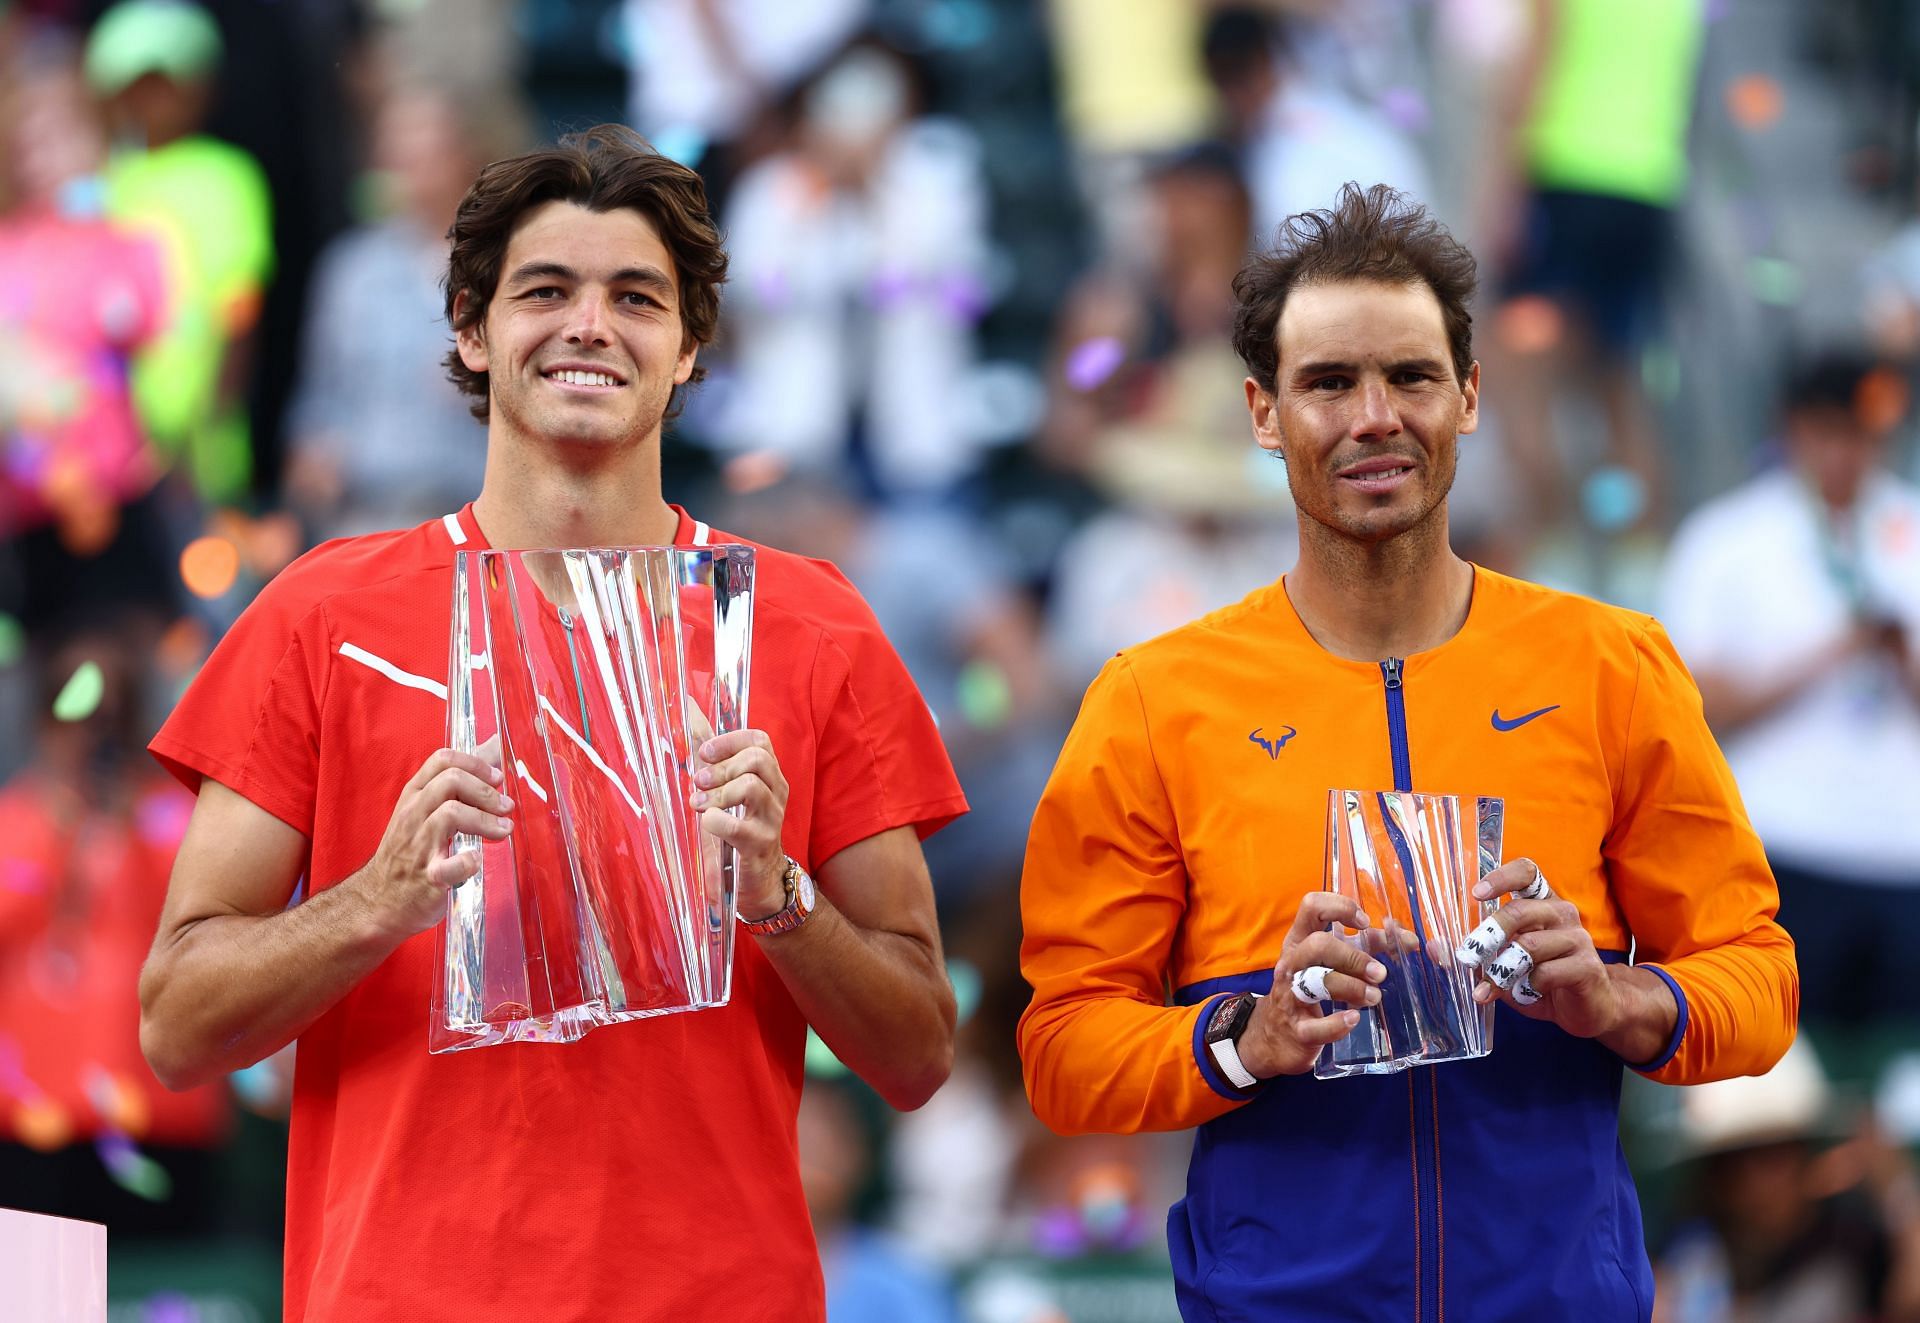 Rafael Nadal finally met his match in Taylor Fritz at the Indian Wells Masters